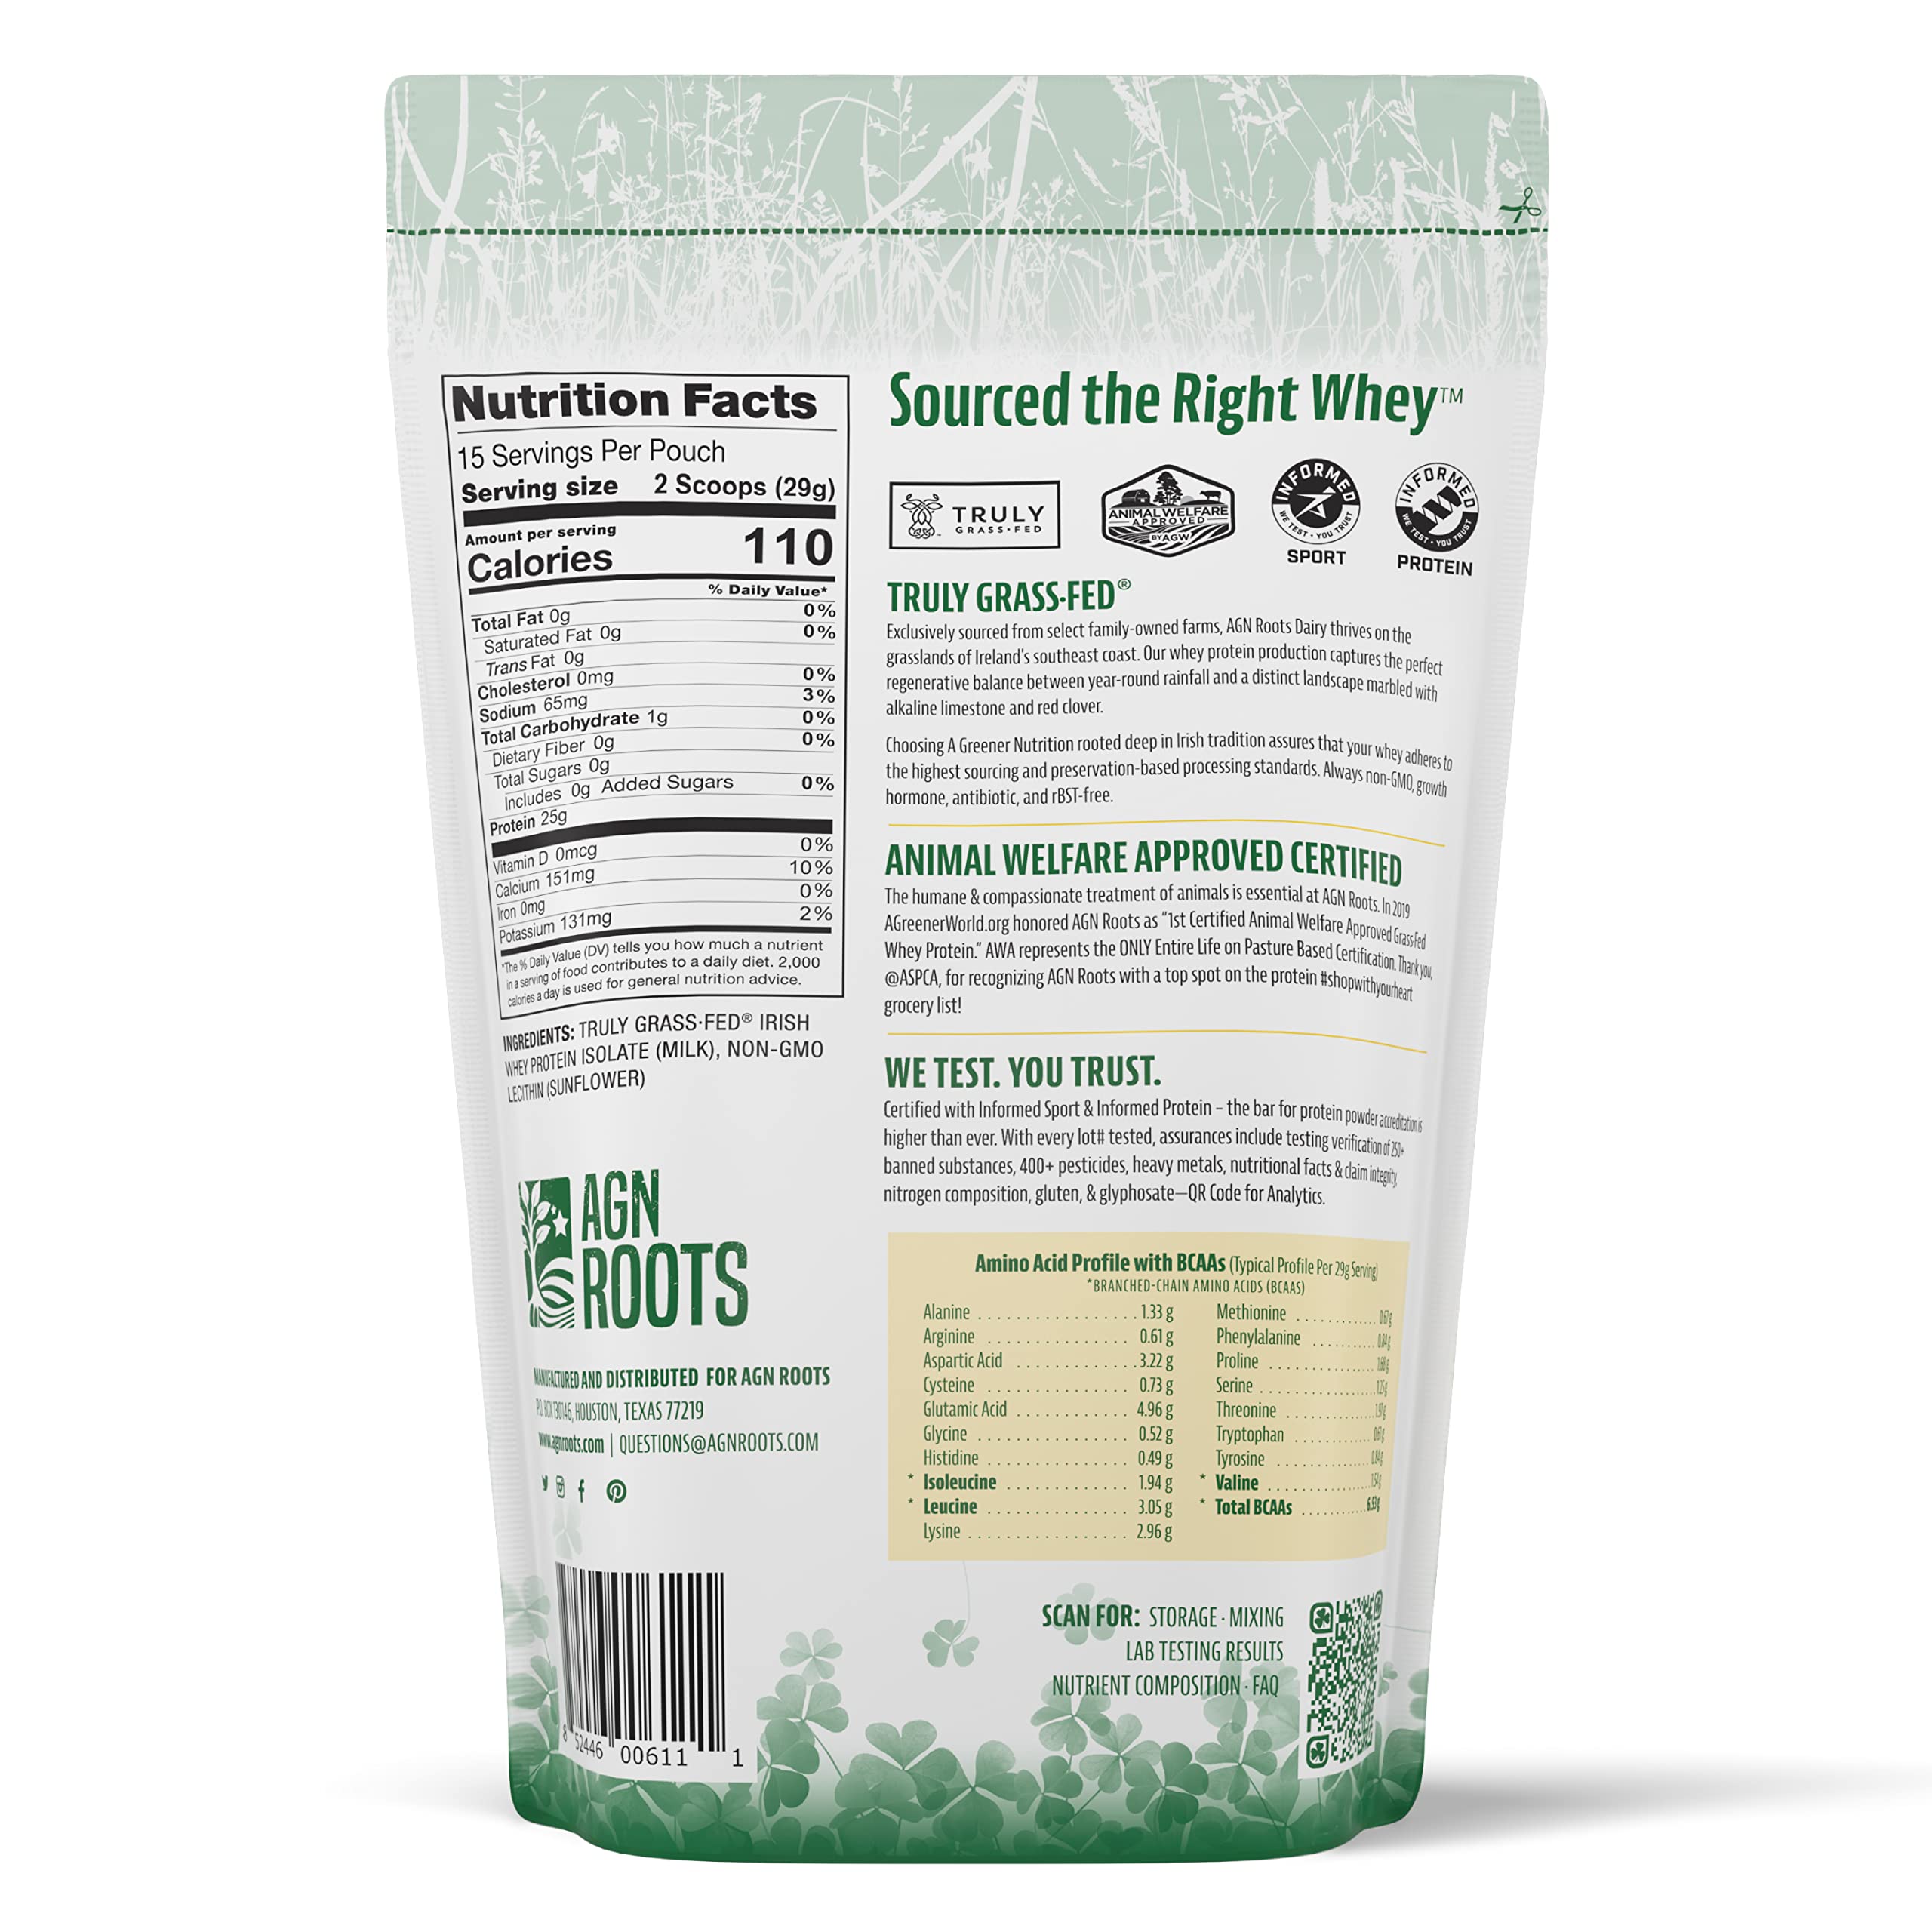 AGN Roots Grass Fed Whey Protein Powder Isolate - Unflavored - Unsweetened - Certified Entire Life On Pasture by A Greener World - ASPCA Registered - Informed Sport - Informed Protein 1lbs